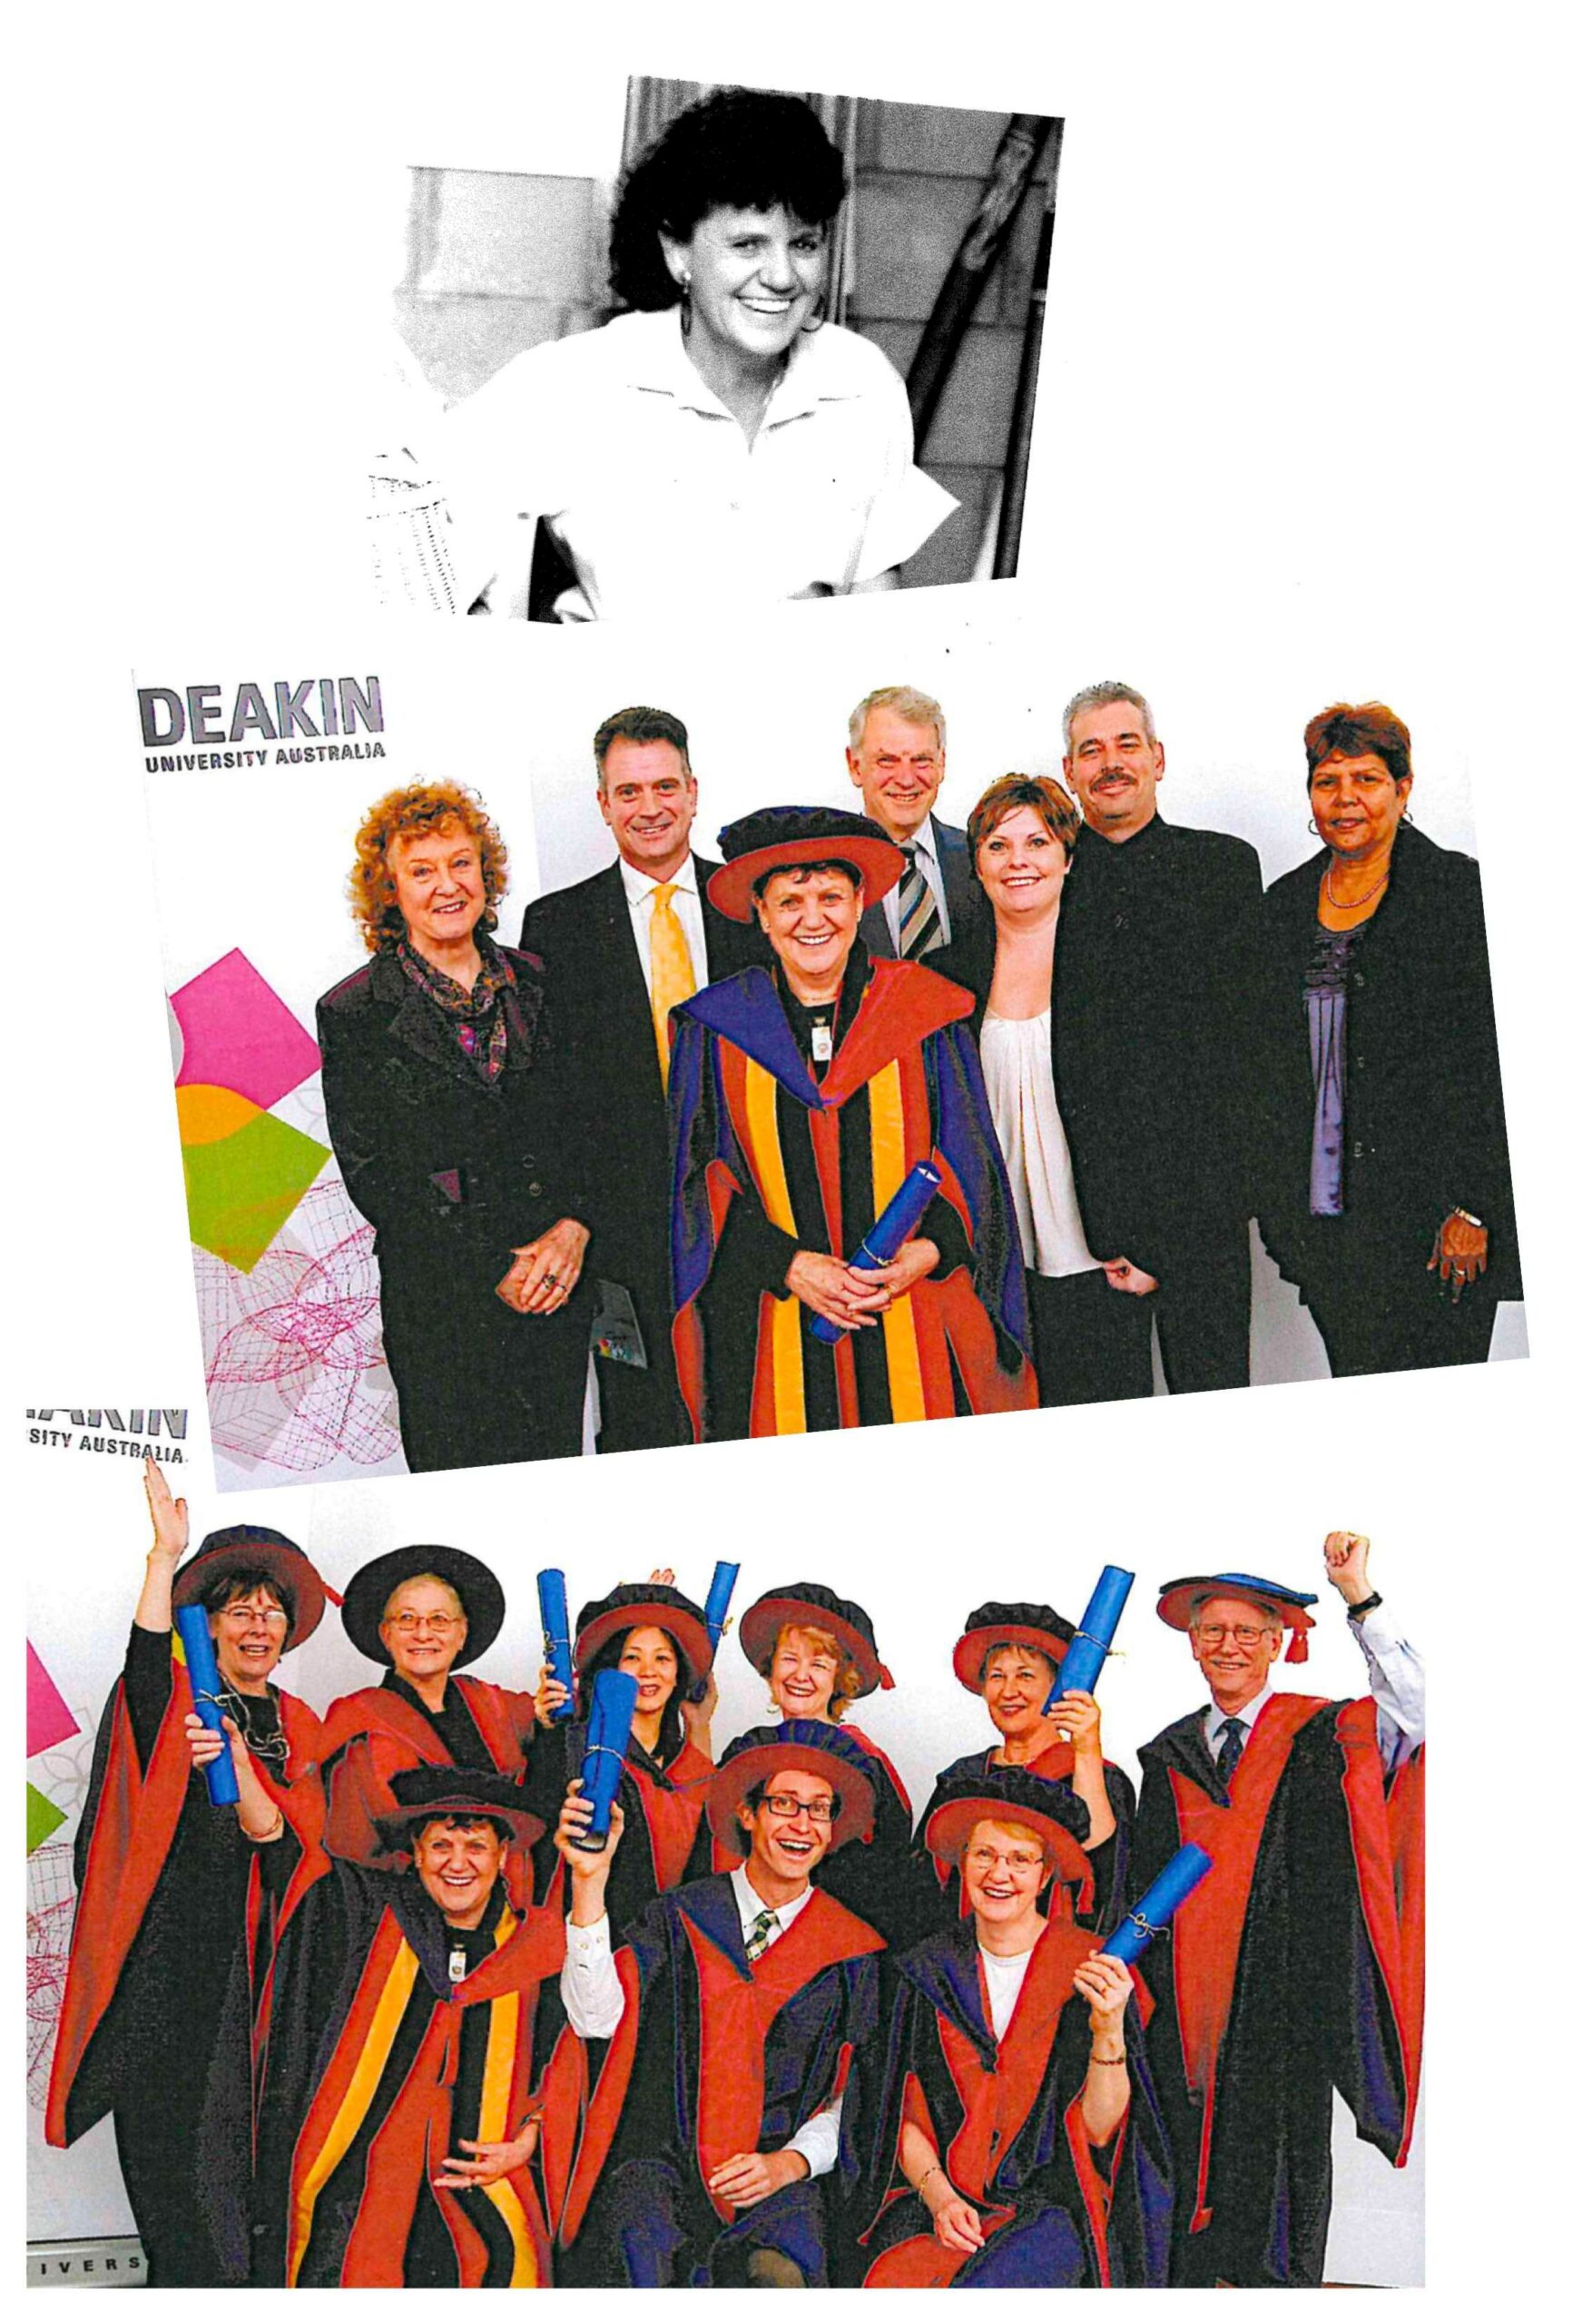 Photo top: Marlene during her time at Monash University. Photos middle and bottom: Marlene with friends and family at her PhD graduation.